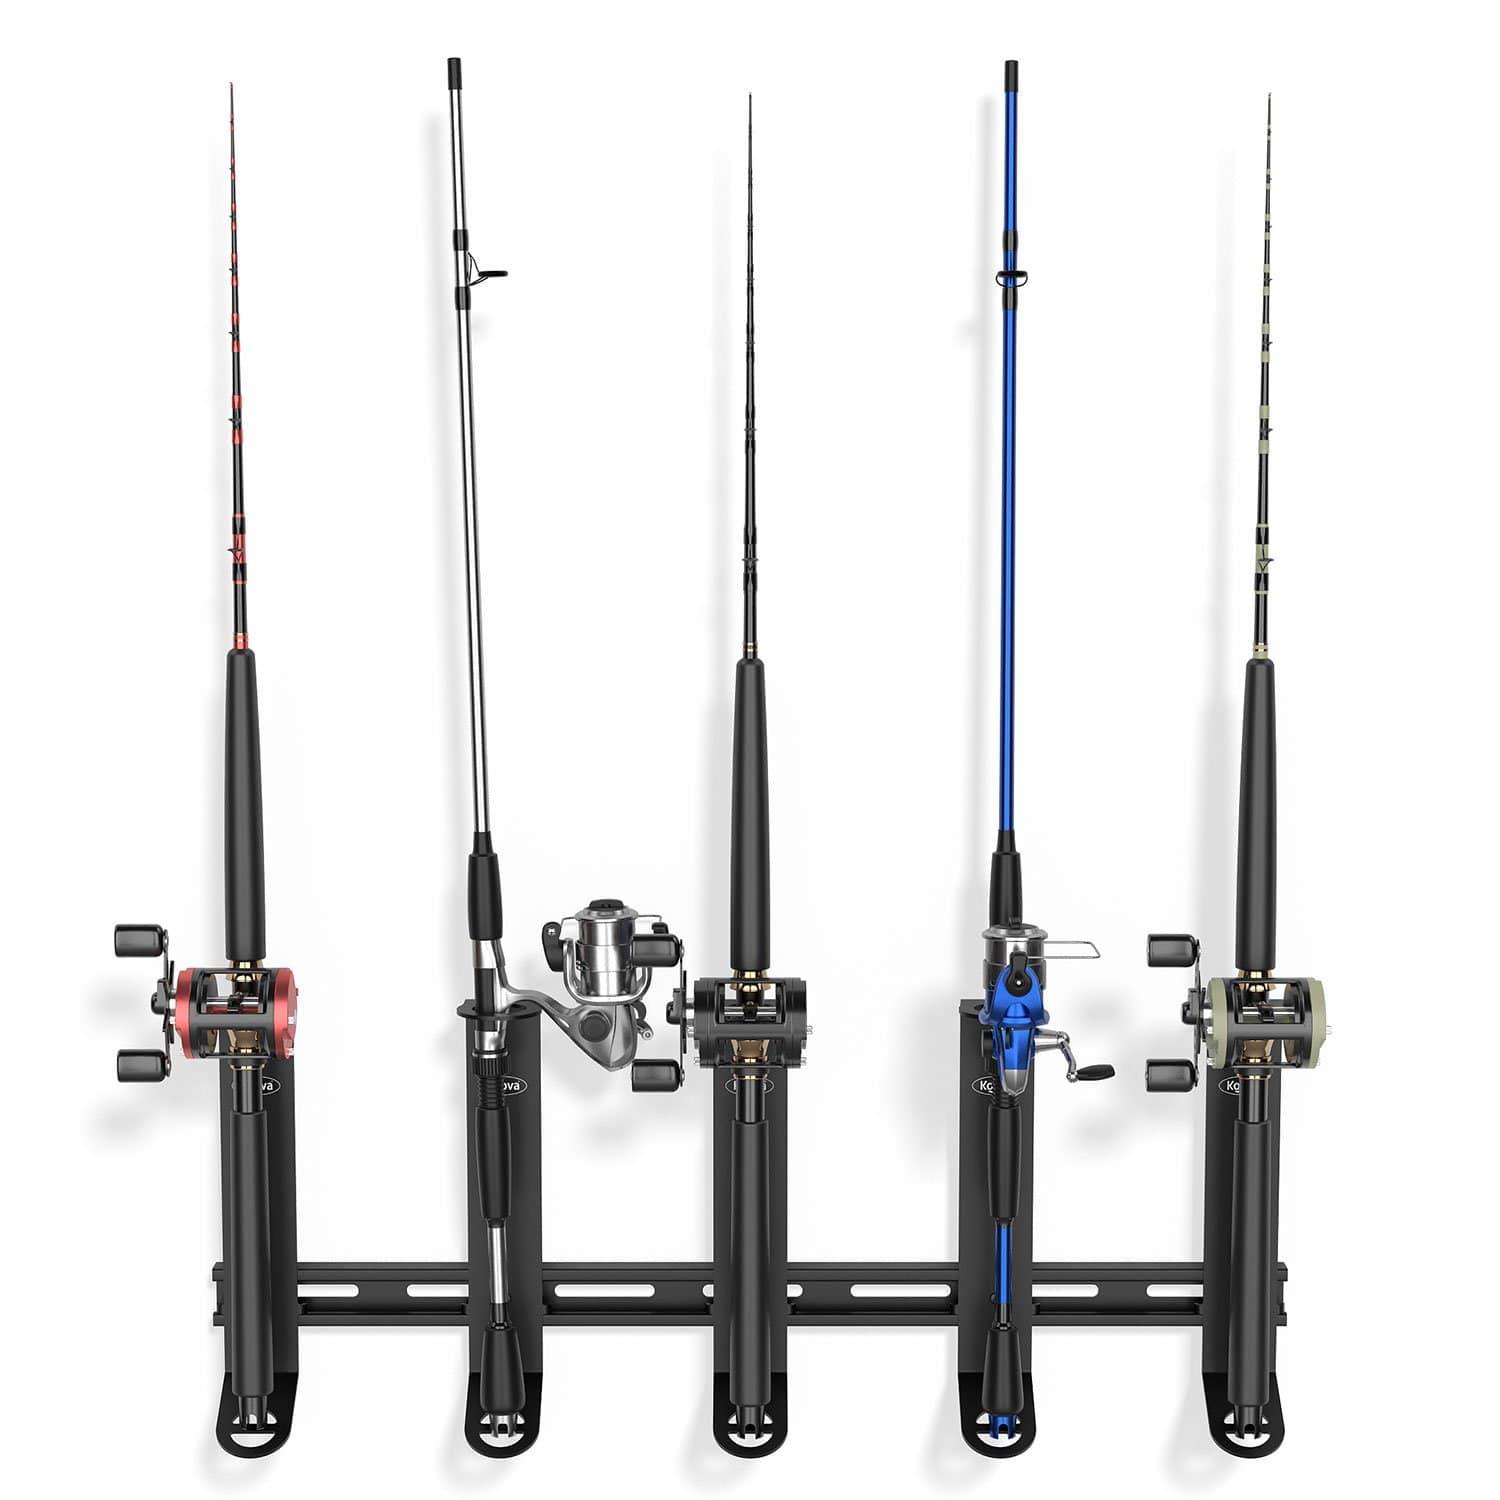 CrownWall Slatwall Steel Fishing Rod Holder - Holds Up to 4 Fishing Rods (2-Piece Set)